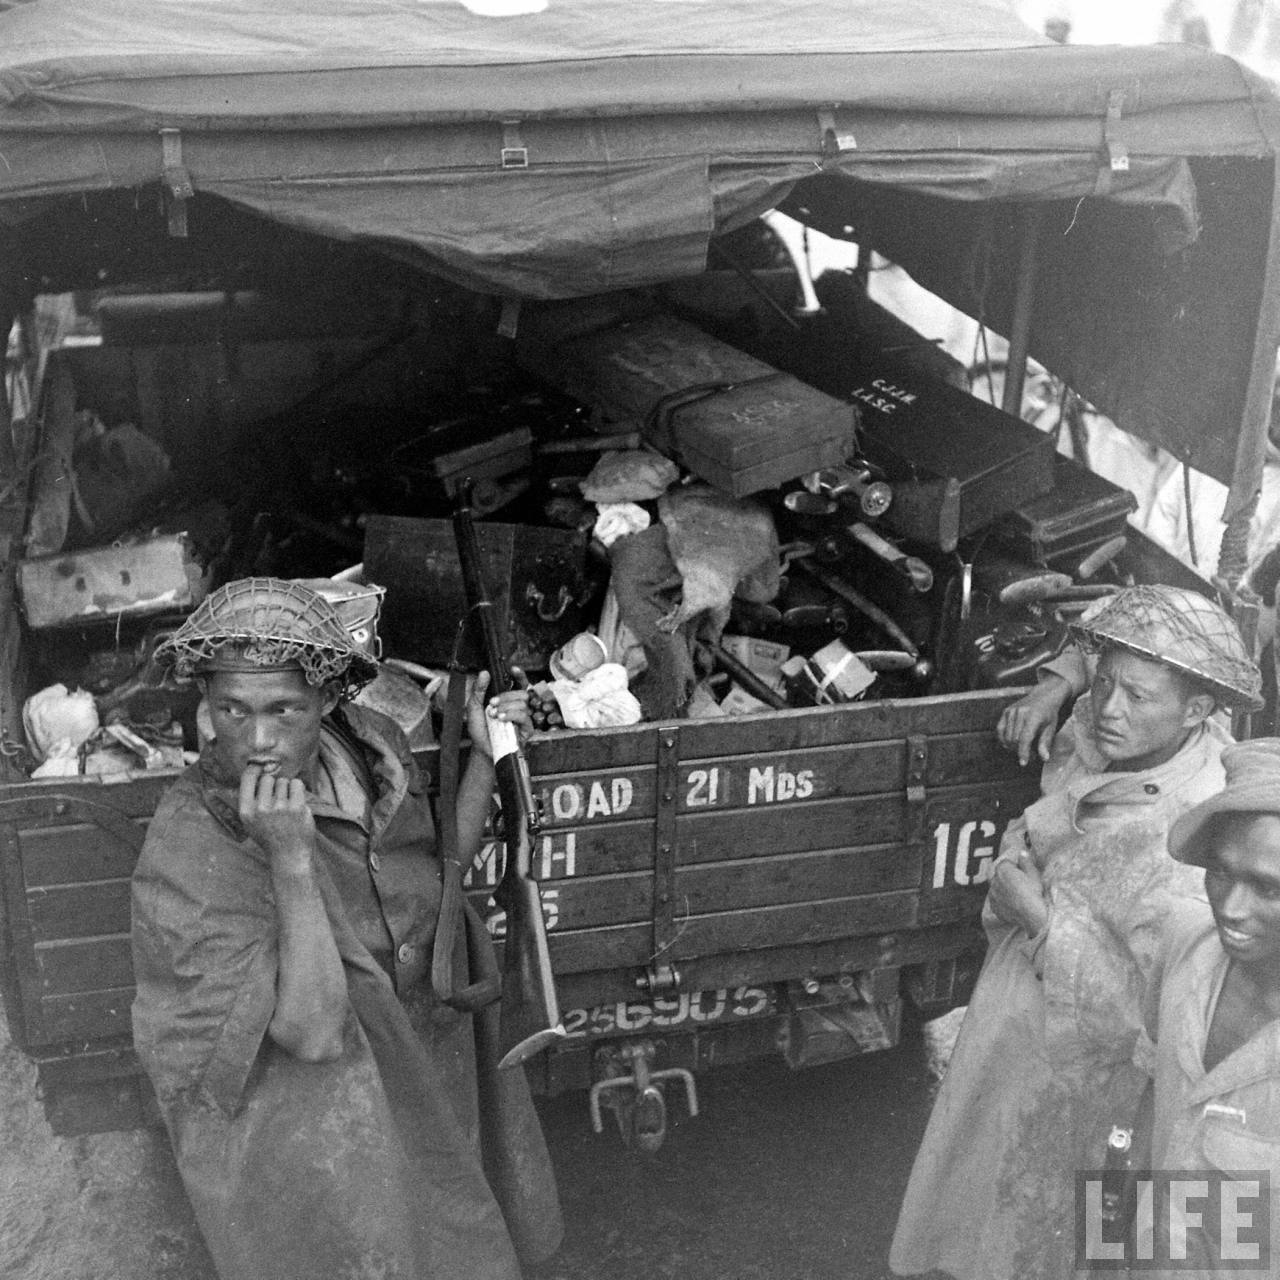 Indian Army Soldiers | Operation Polo | Hyderabad Police Action | Annexation of Hyderabad, Hyderabad (Deccan), Telangana, India | Rare & Old Vintage Photos of Operation Polo, Hyderabad (Deccan), Telangana, India (1948)